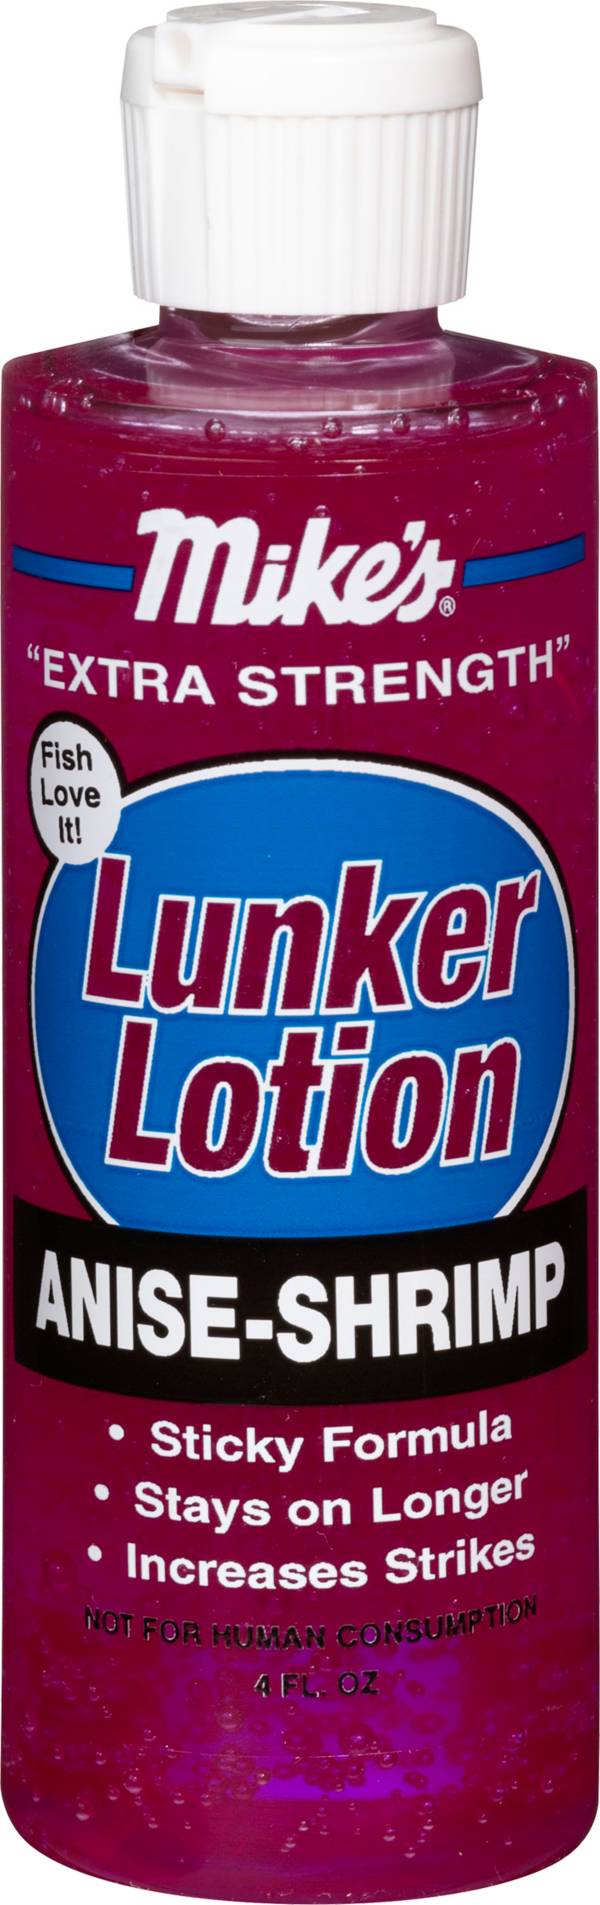 Mike's Lunker Lotion product image